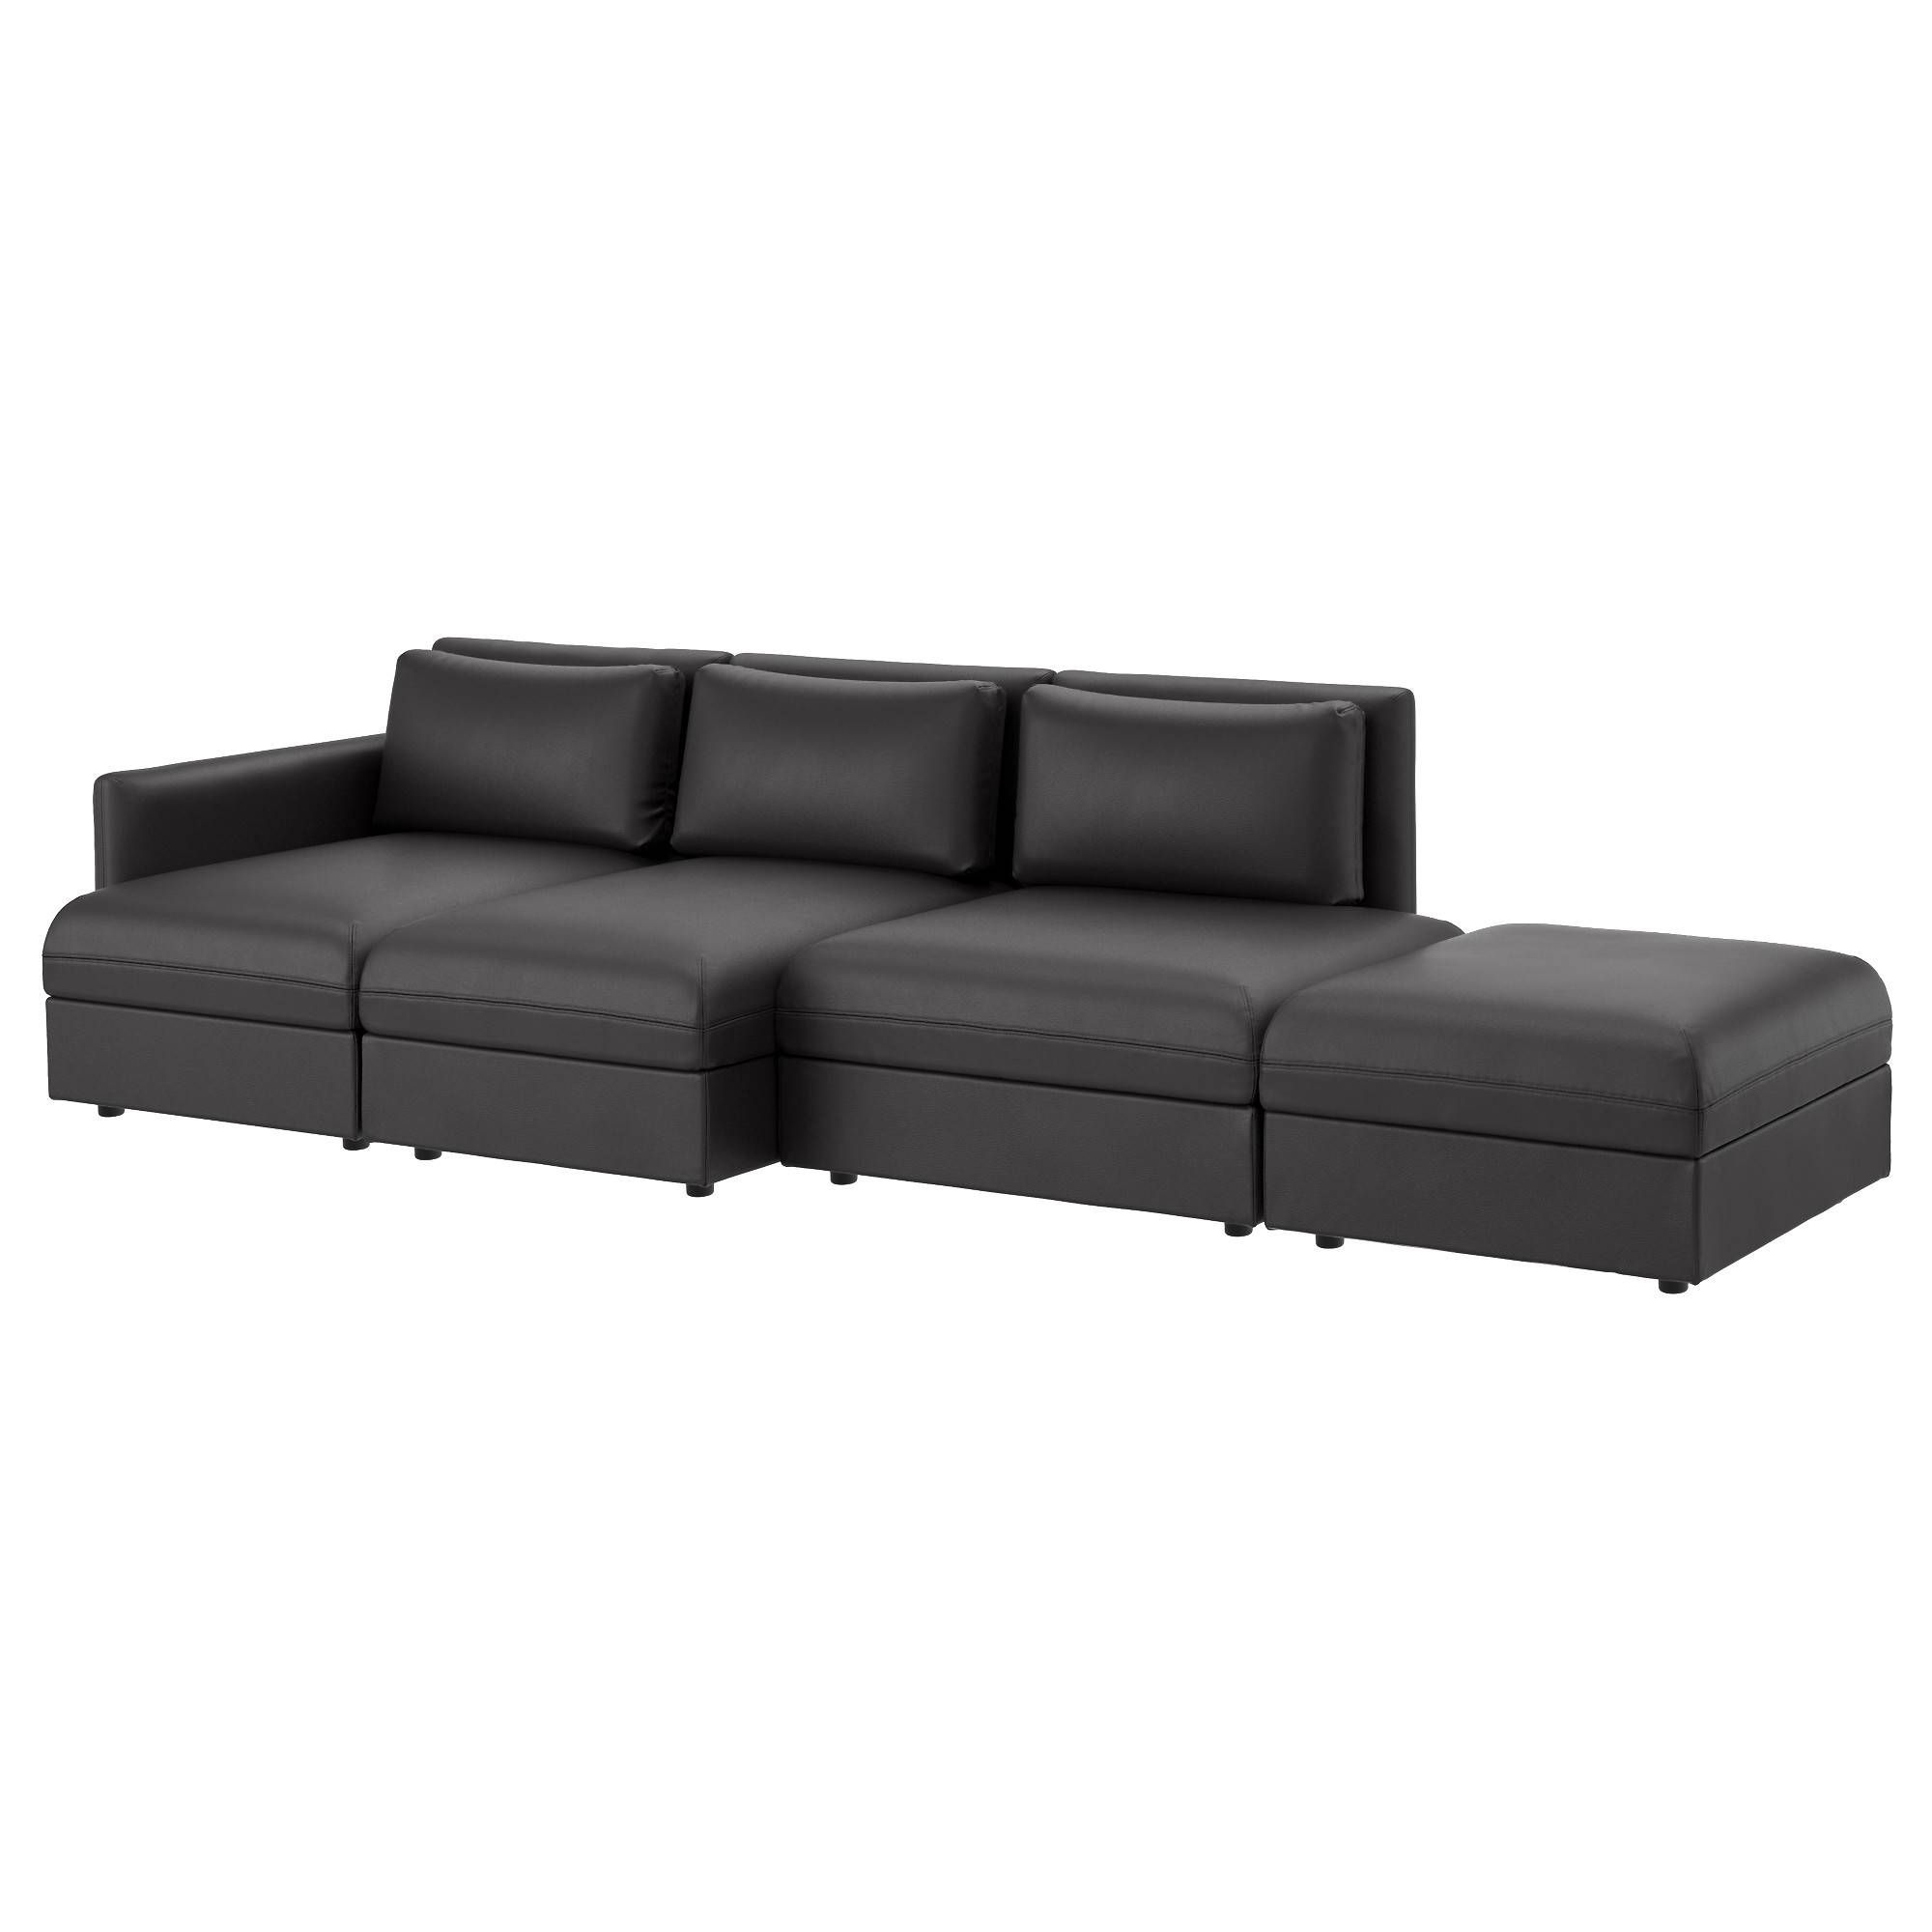 Leather Sofas & Coated Fabric Sofas | Ikea Throughout 4 Seat Leather Sofas (View 23 of 30)